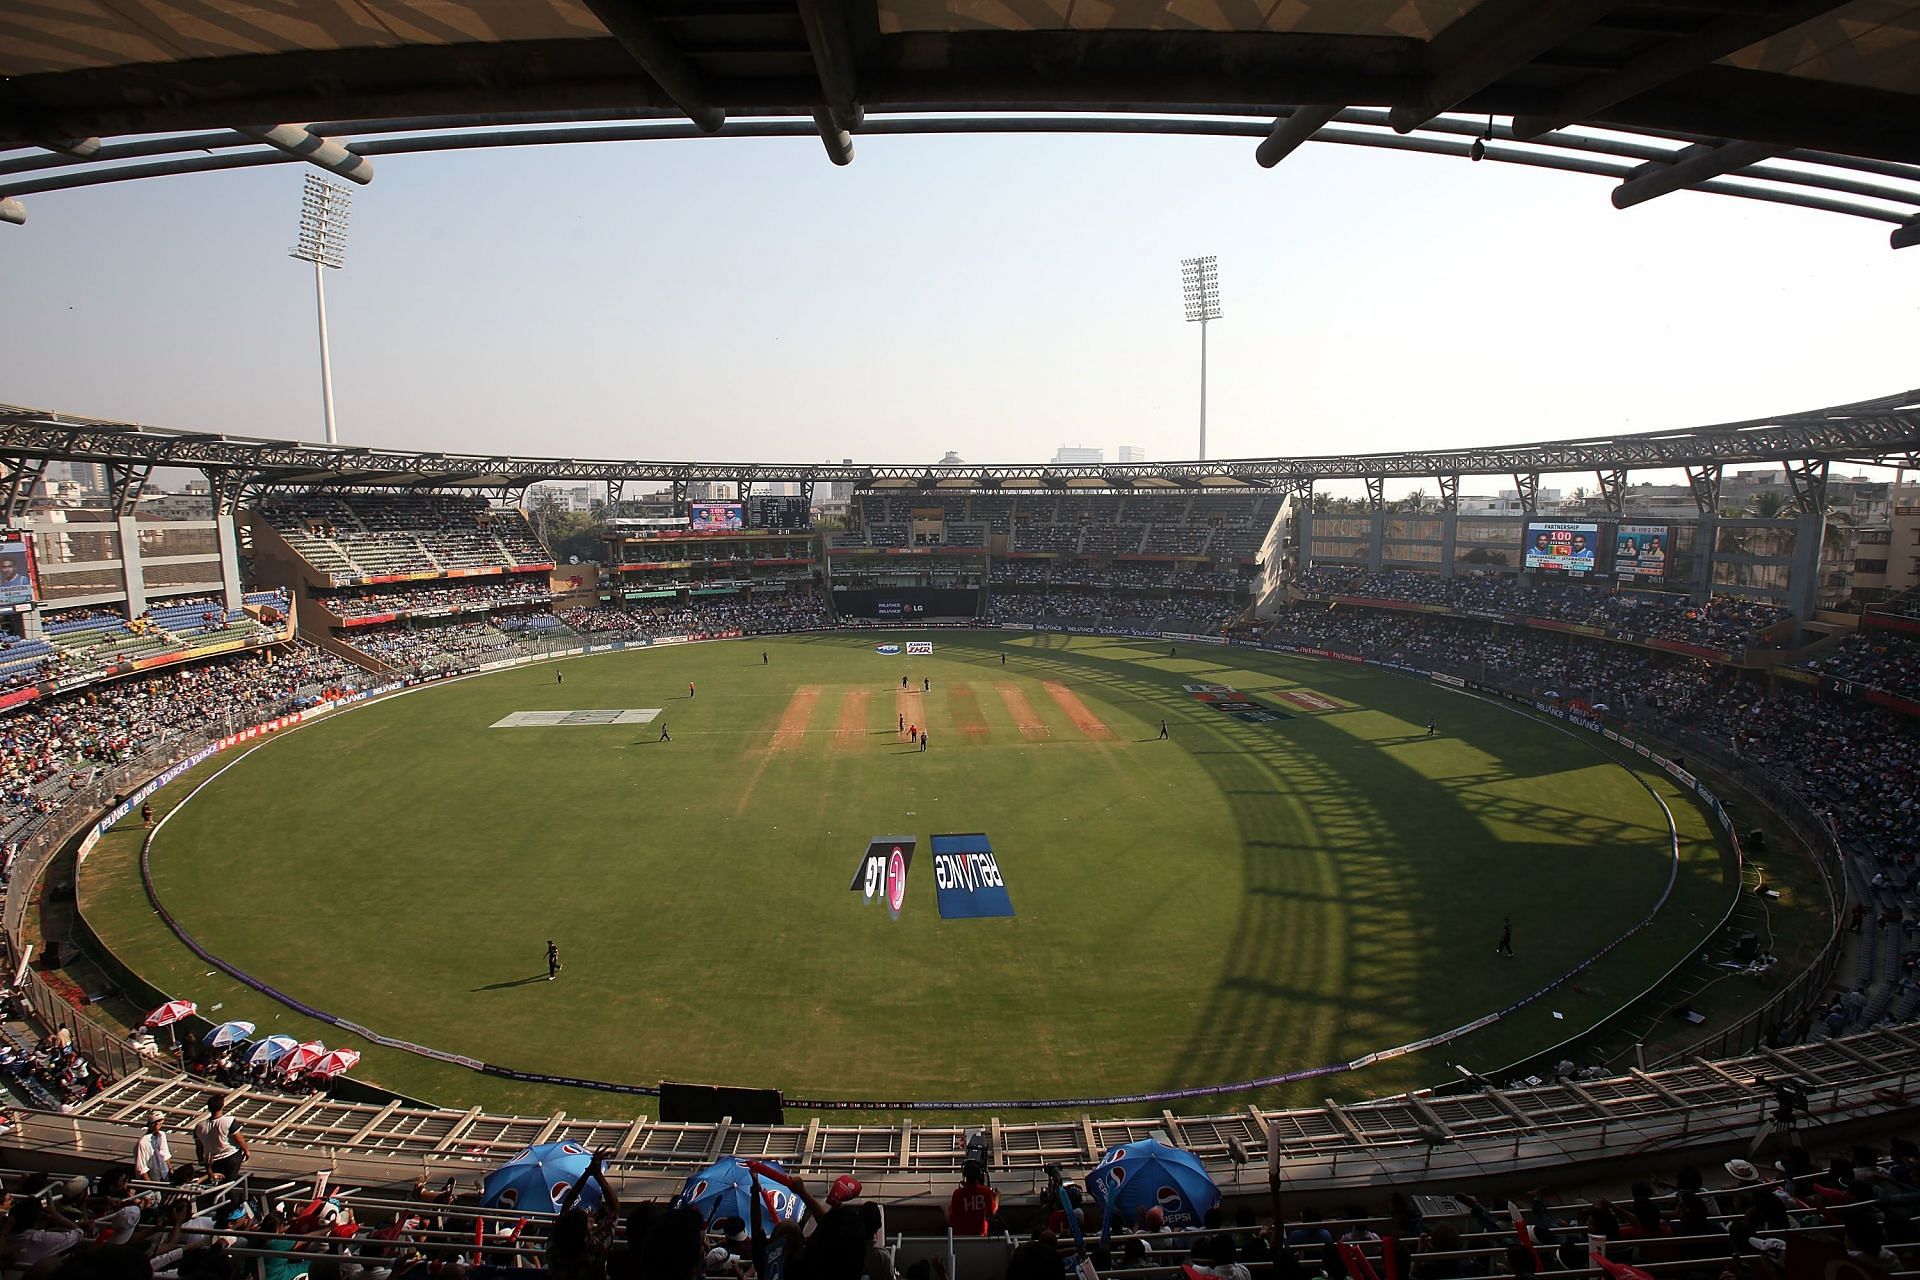 Wankhede Stadium will host the 2nd Test match of the India vs New Zealand series